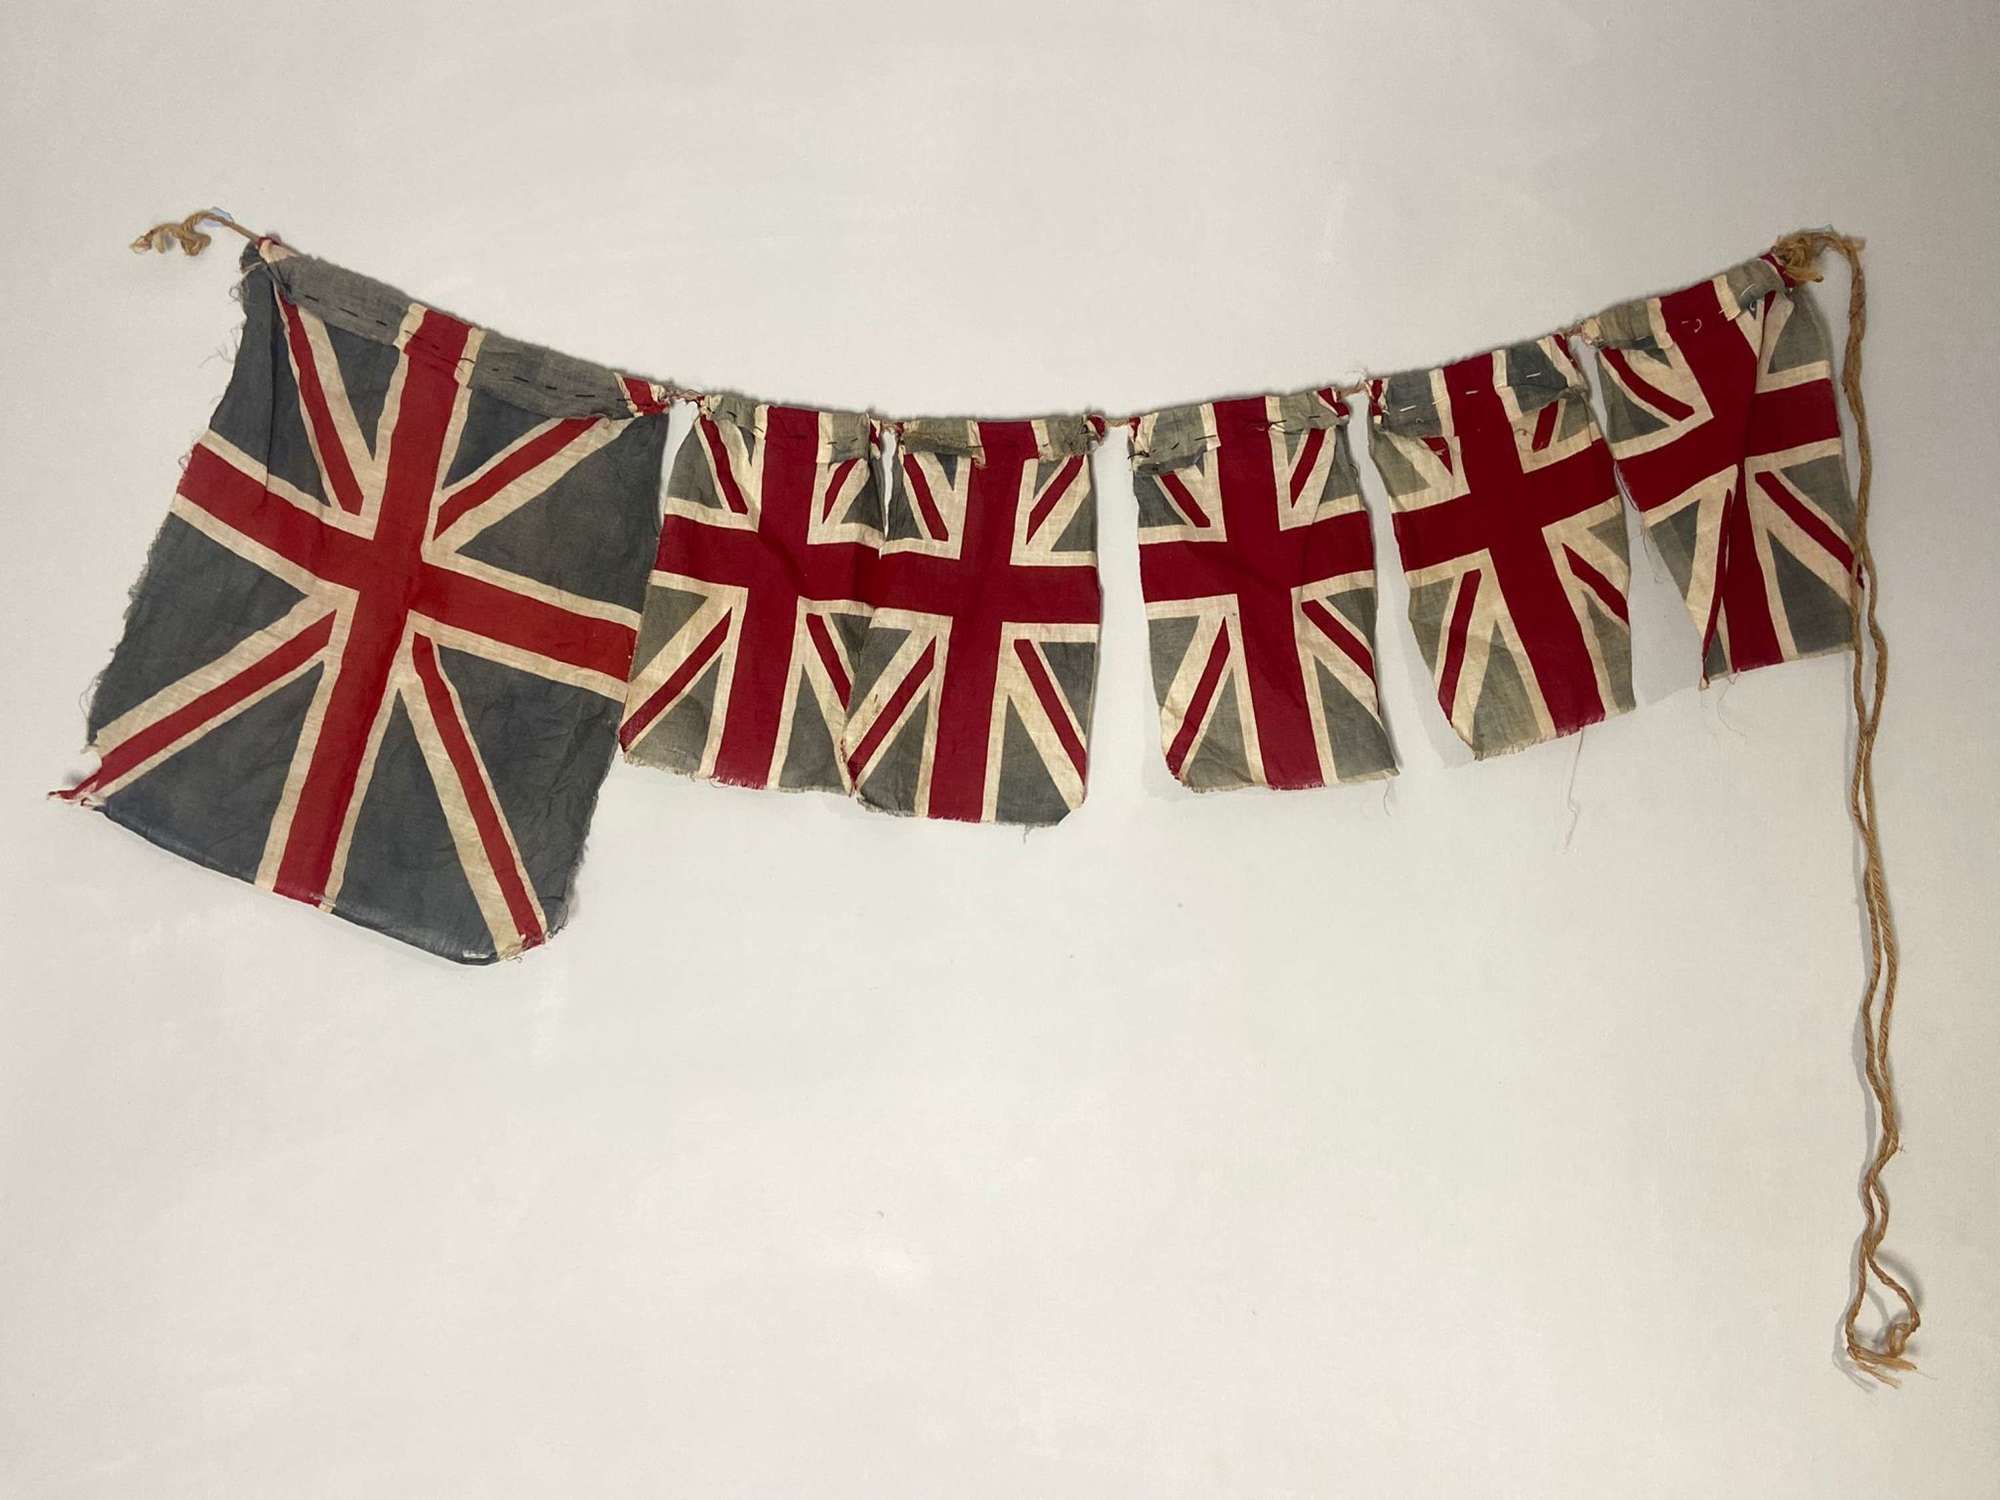 WW2 Home Front Victory Parade Printed British Union Jack Bunting Flags